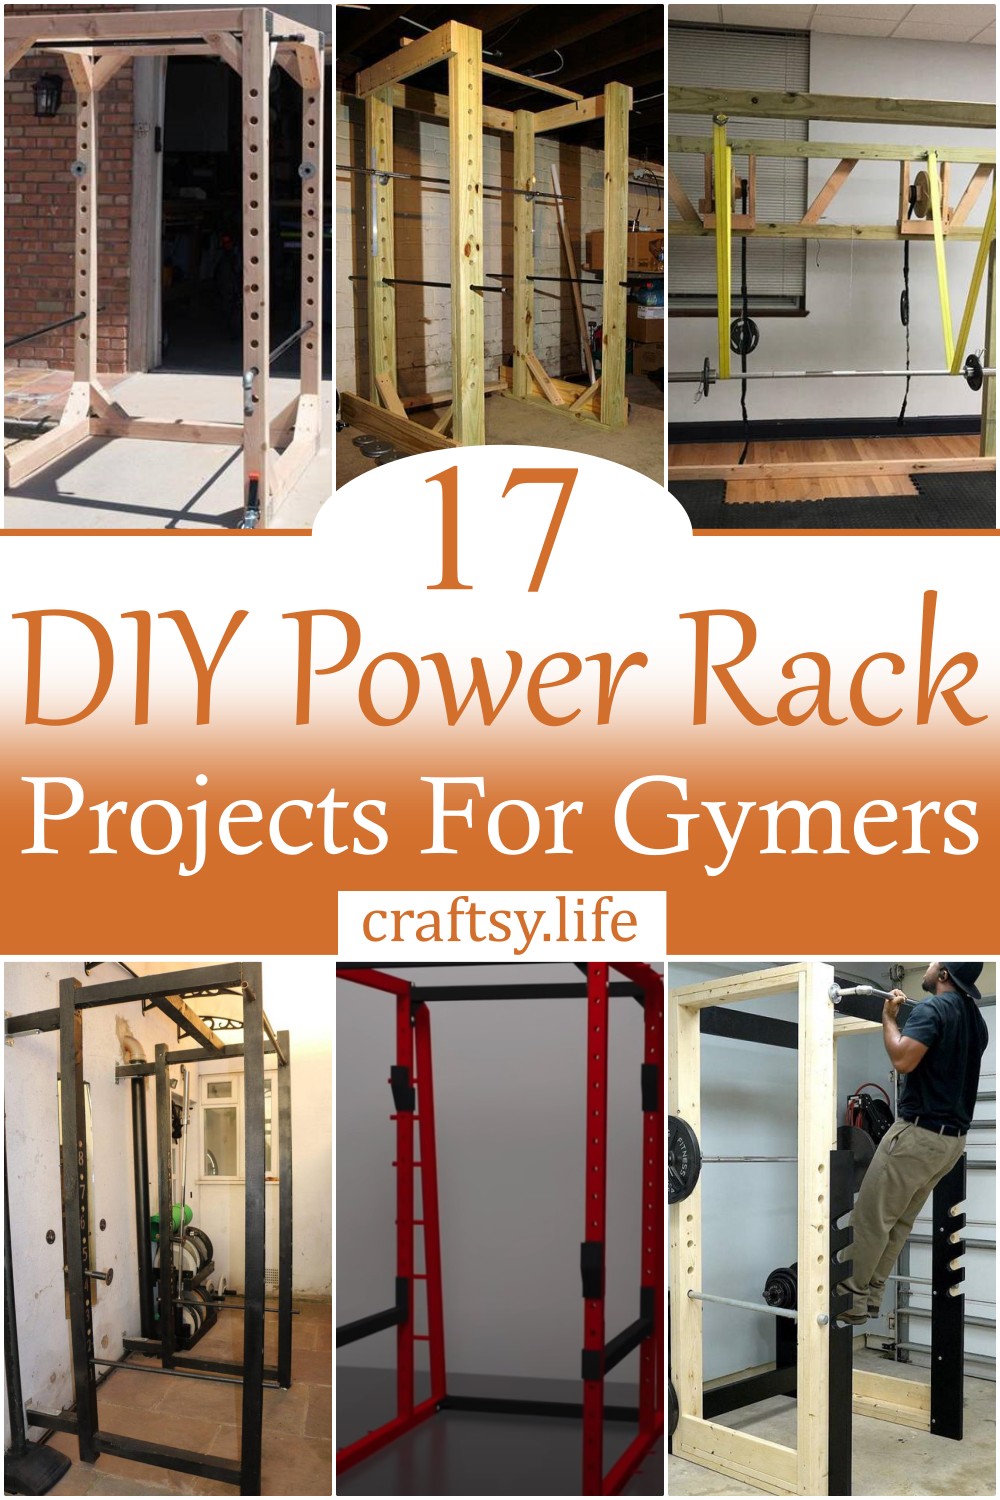 DIY Power Rack Projects